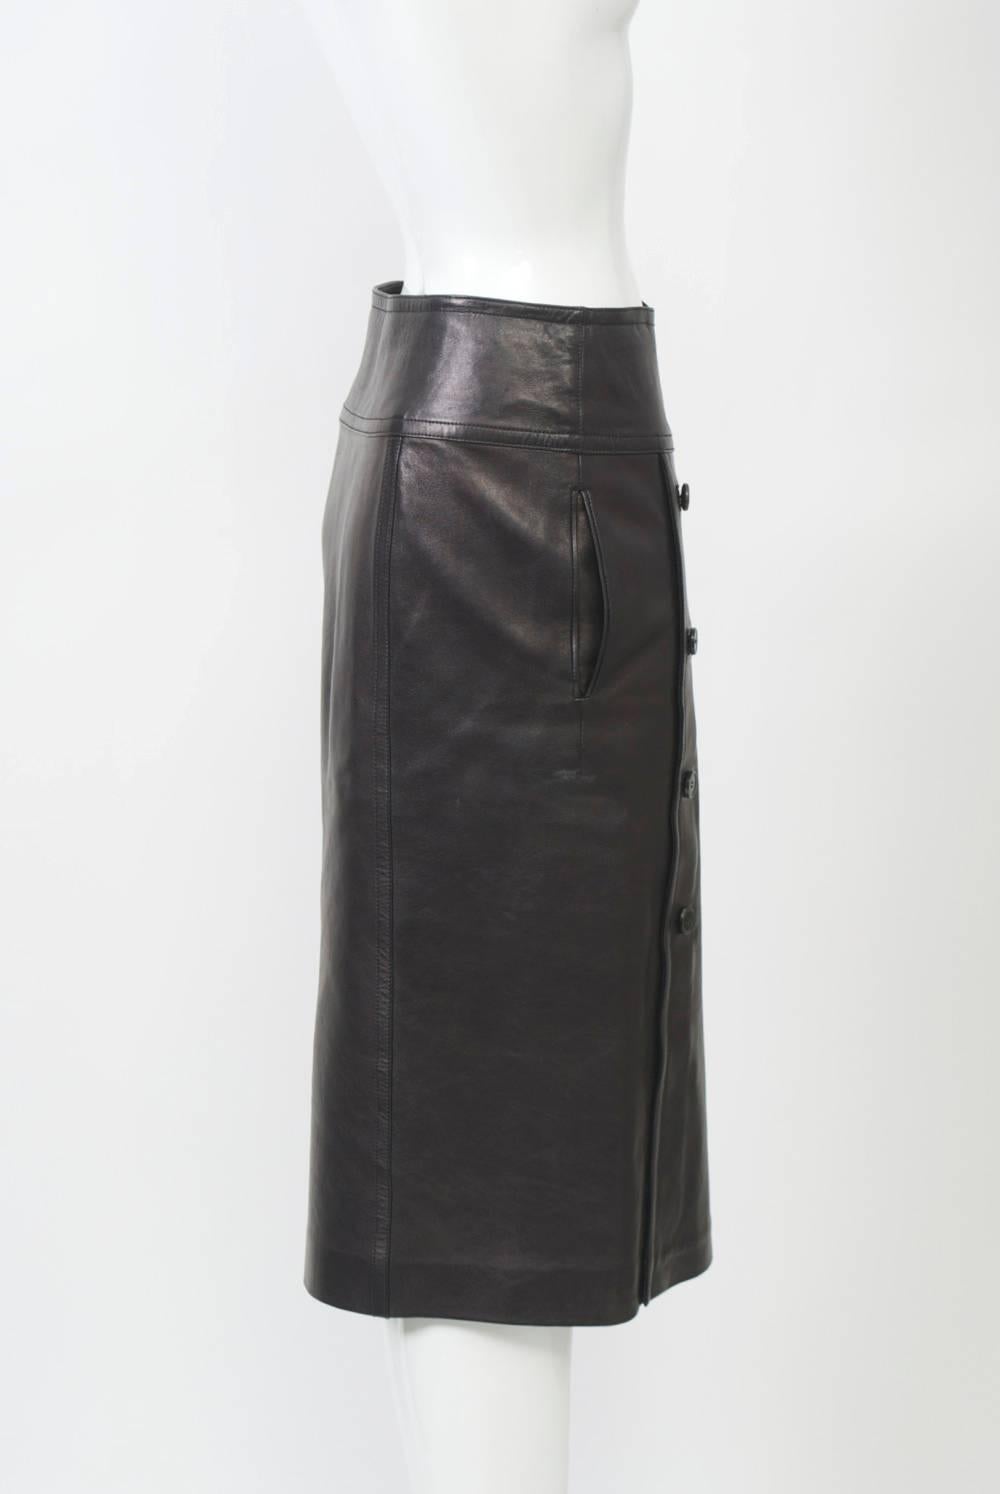 Black leather double-breasted slim skirt by Yves Saint Laurent with buckled hip band and side slit pockets. Below knee length, tapered profile.